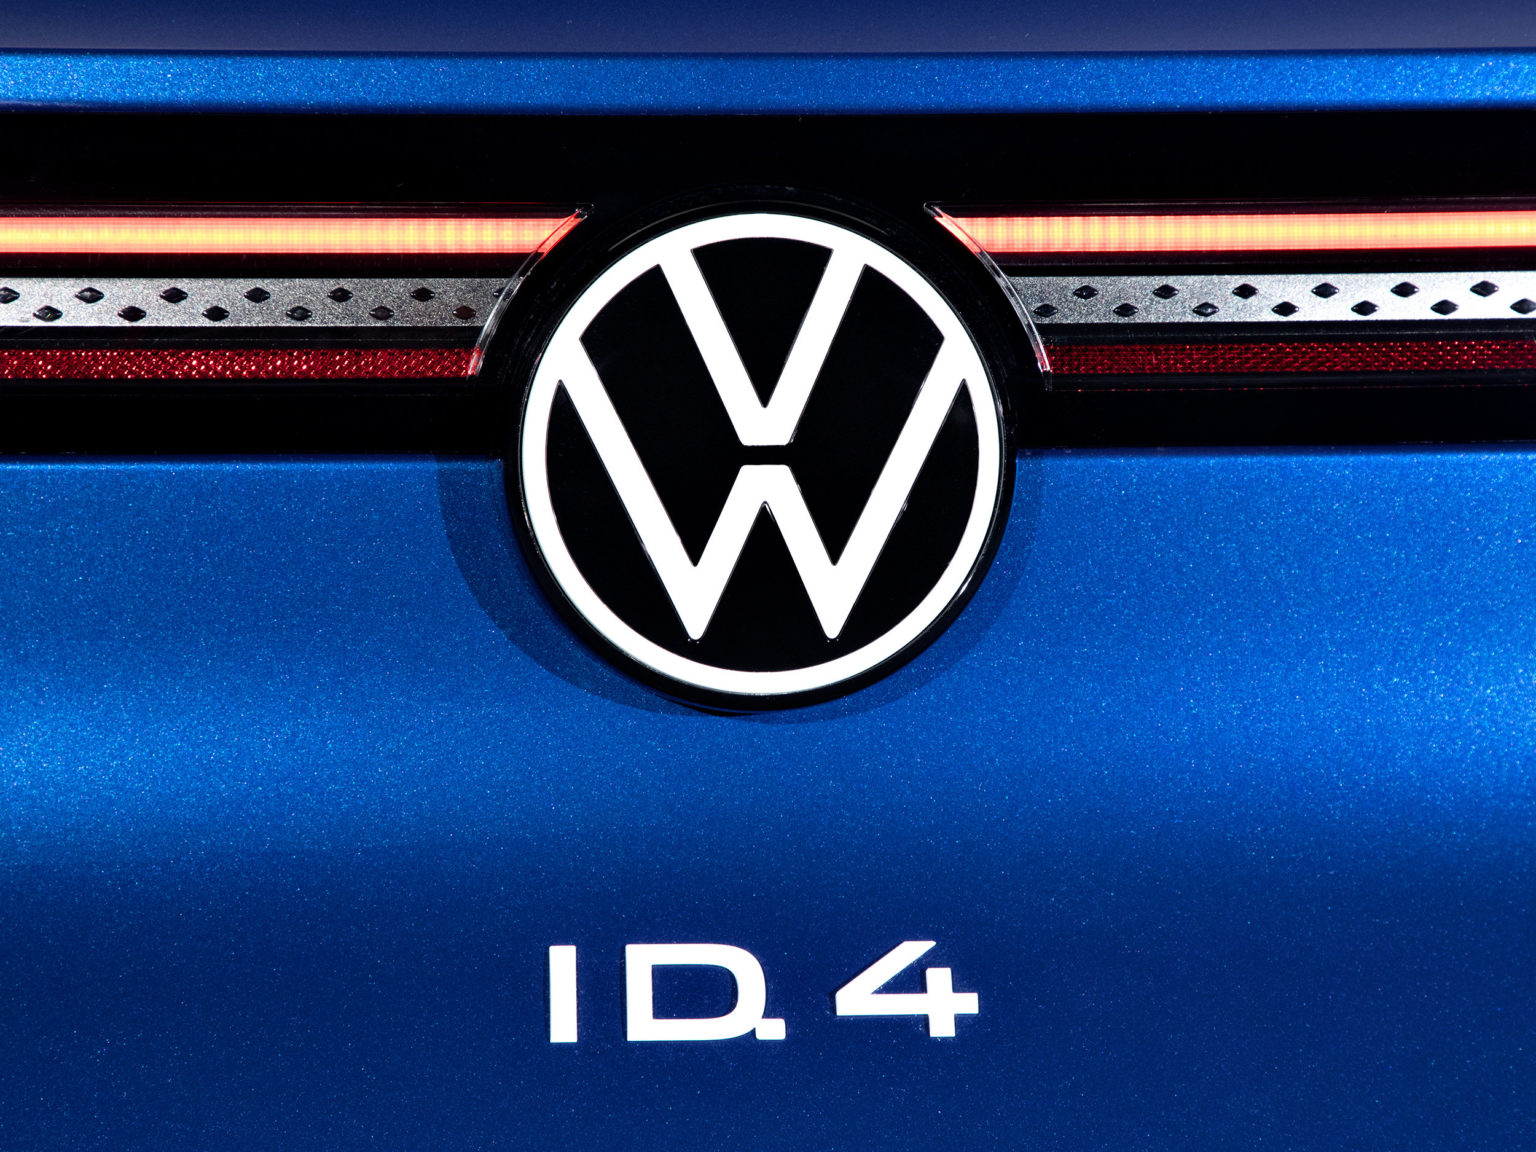 The ID.4 will ramp up production as the U.S. says goodbye to the Passat.